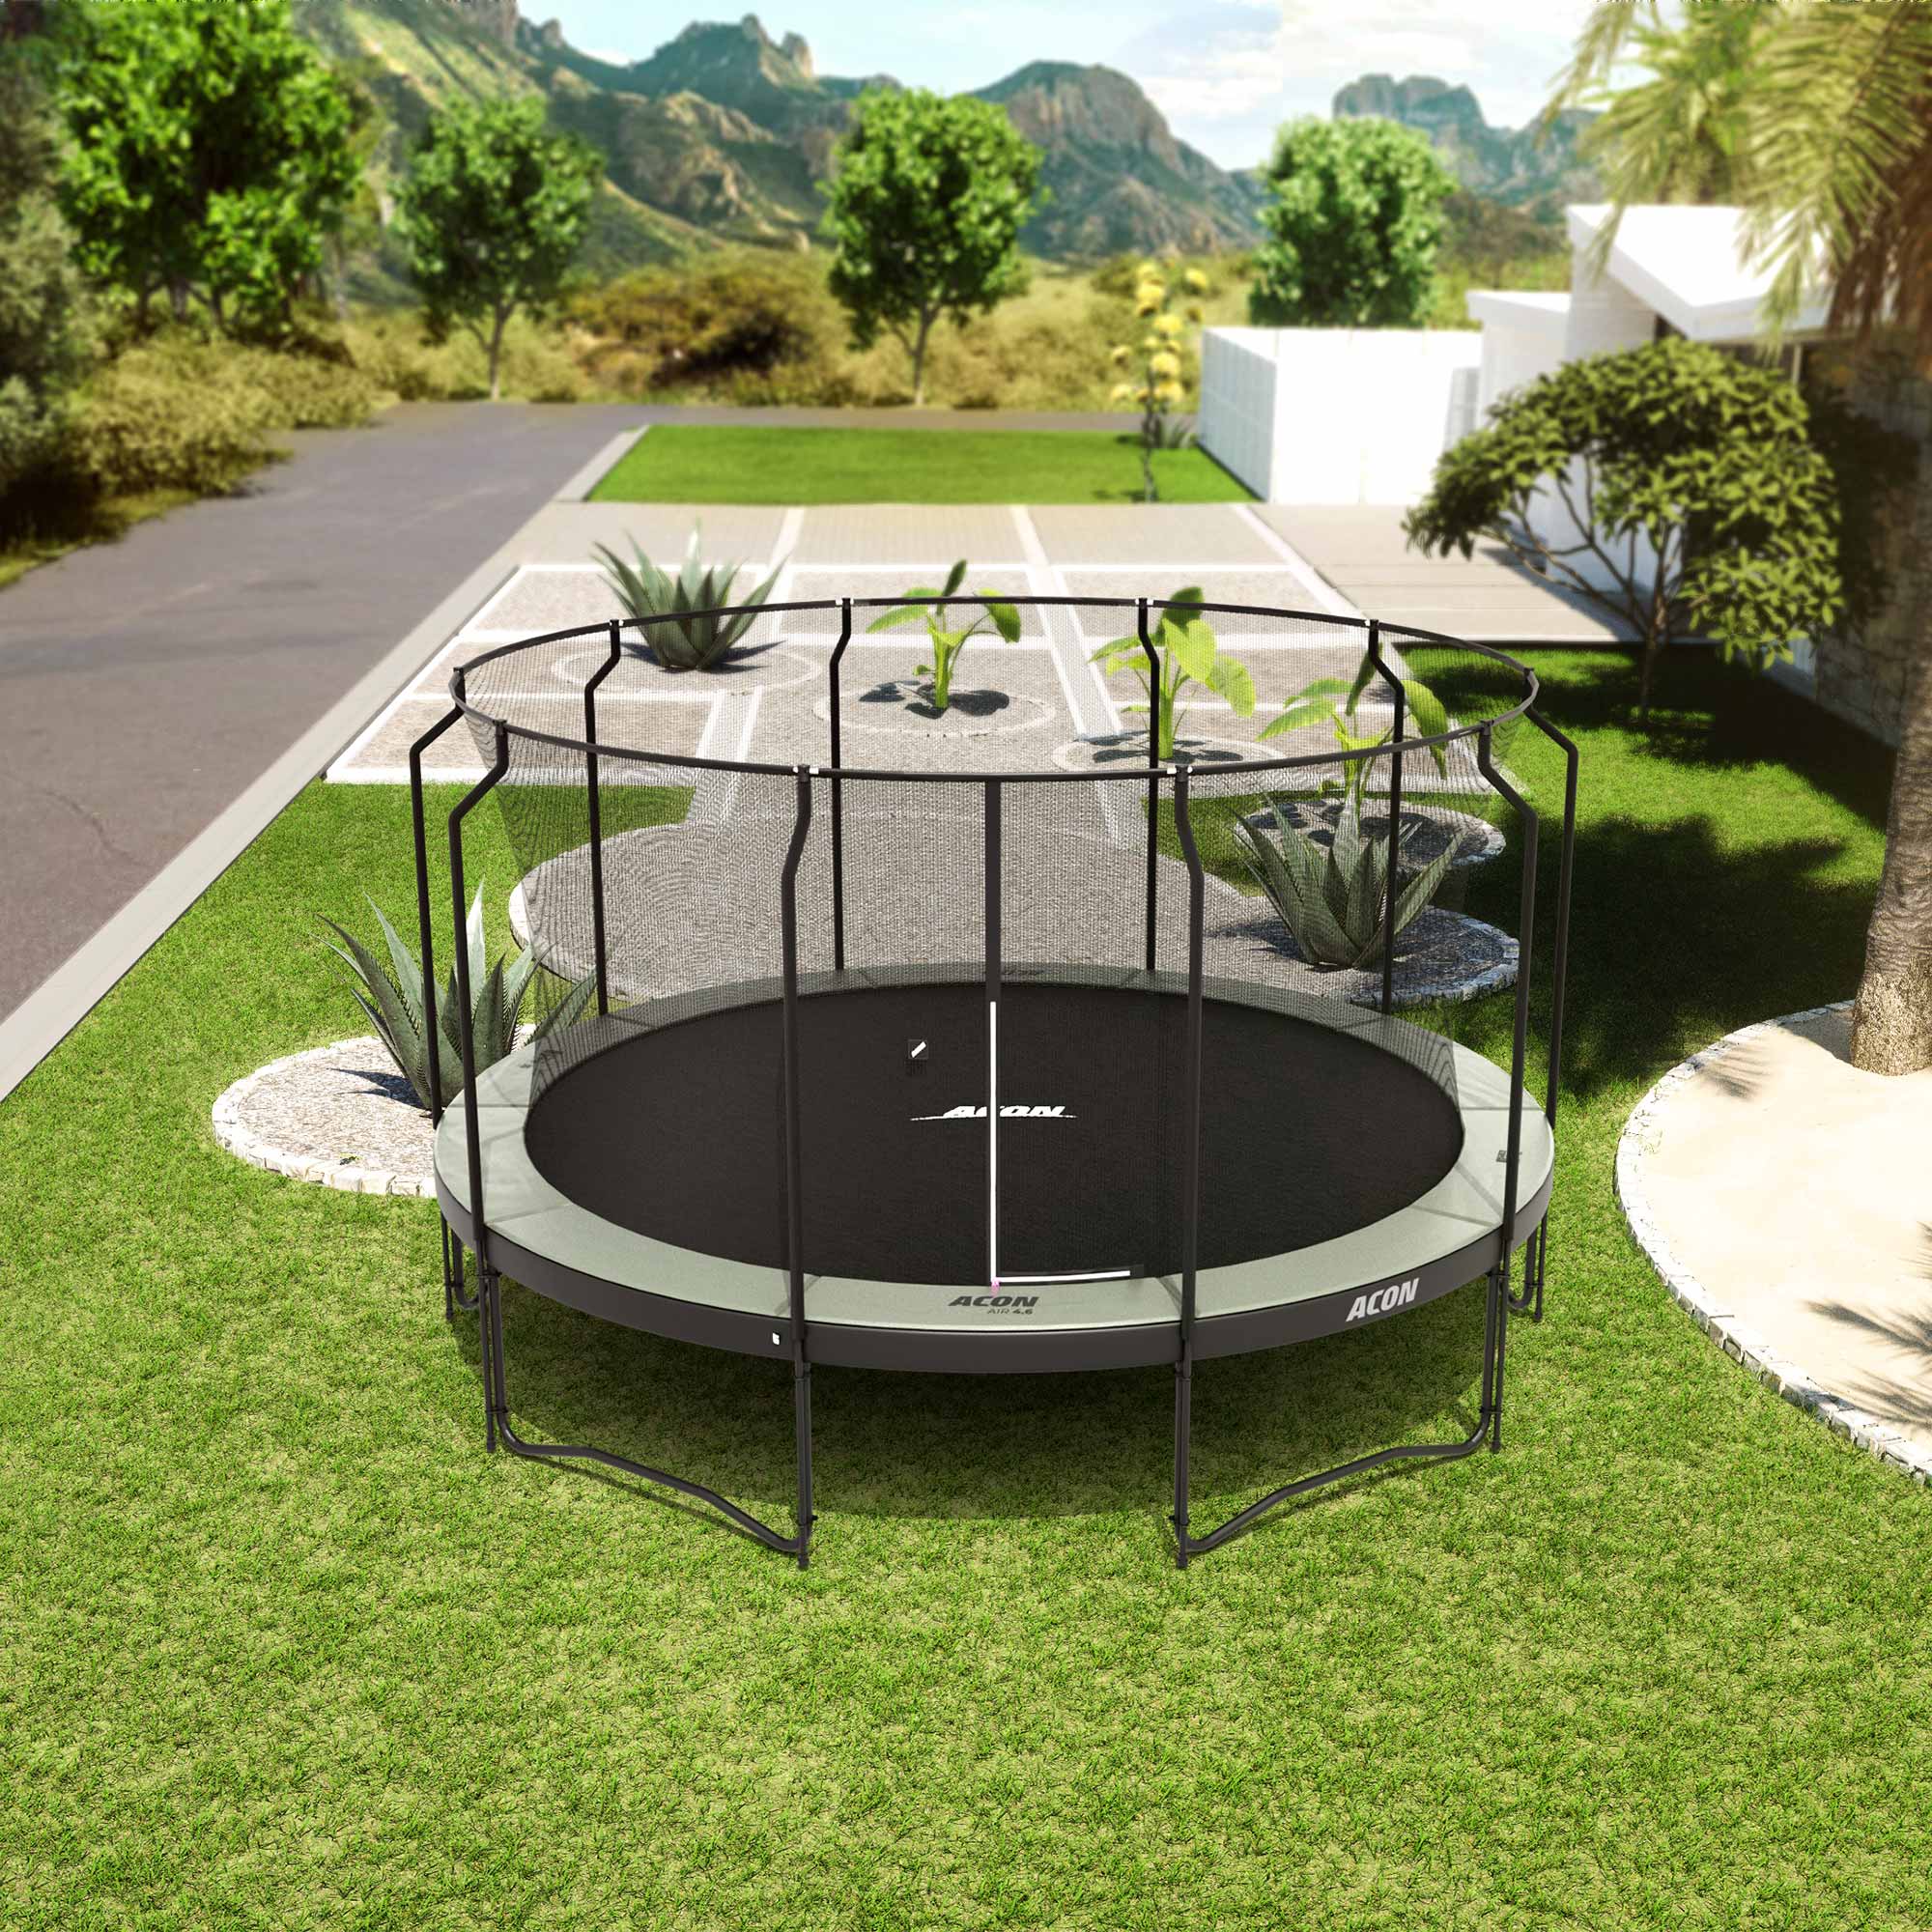 ACON Air 15ft Trampoline with Premium Enclosure in the backyard.